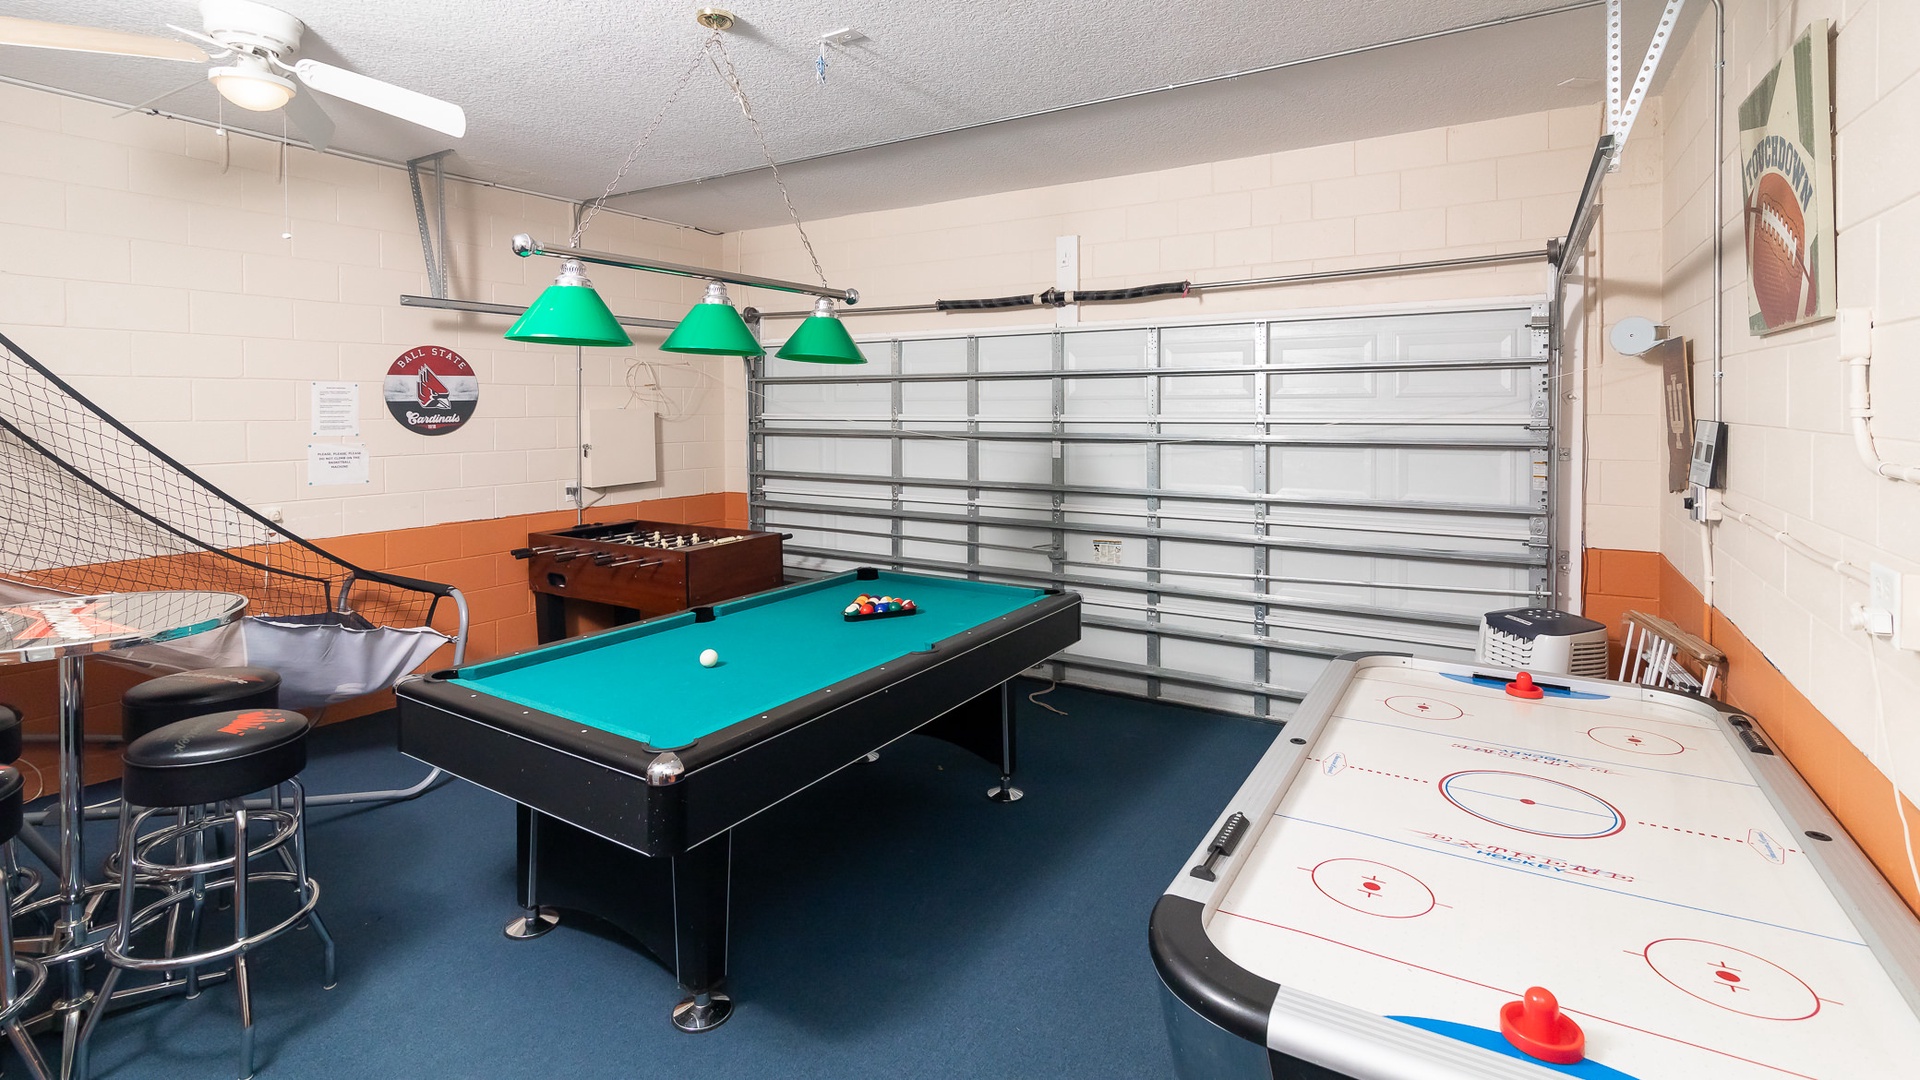 Game room located in the garage